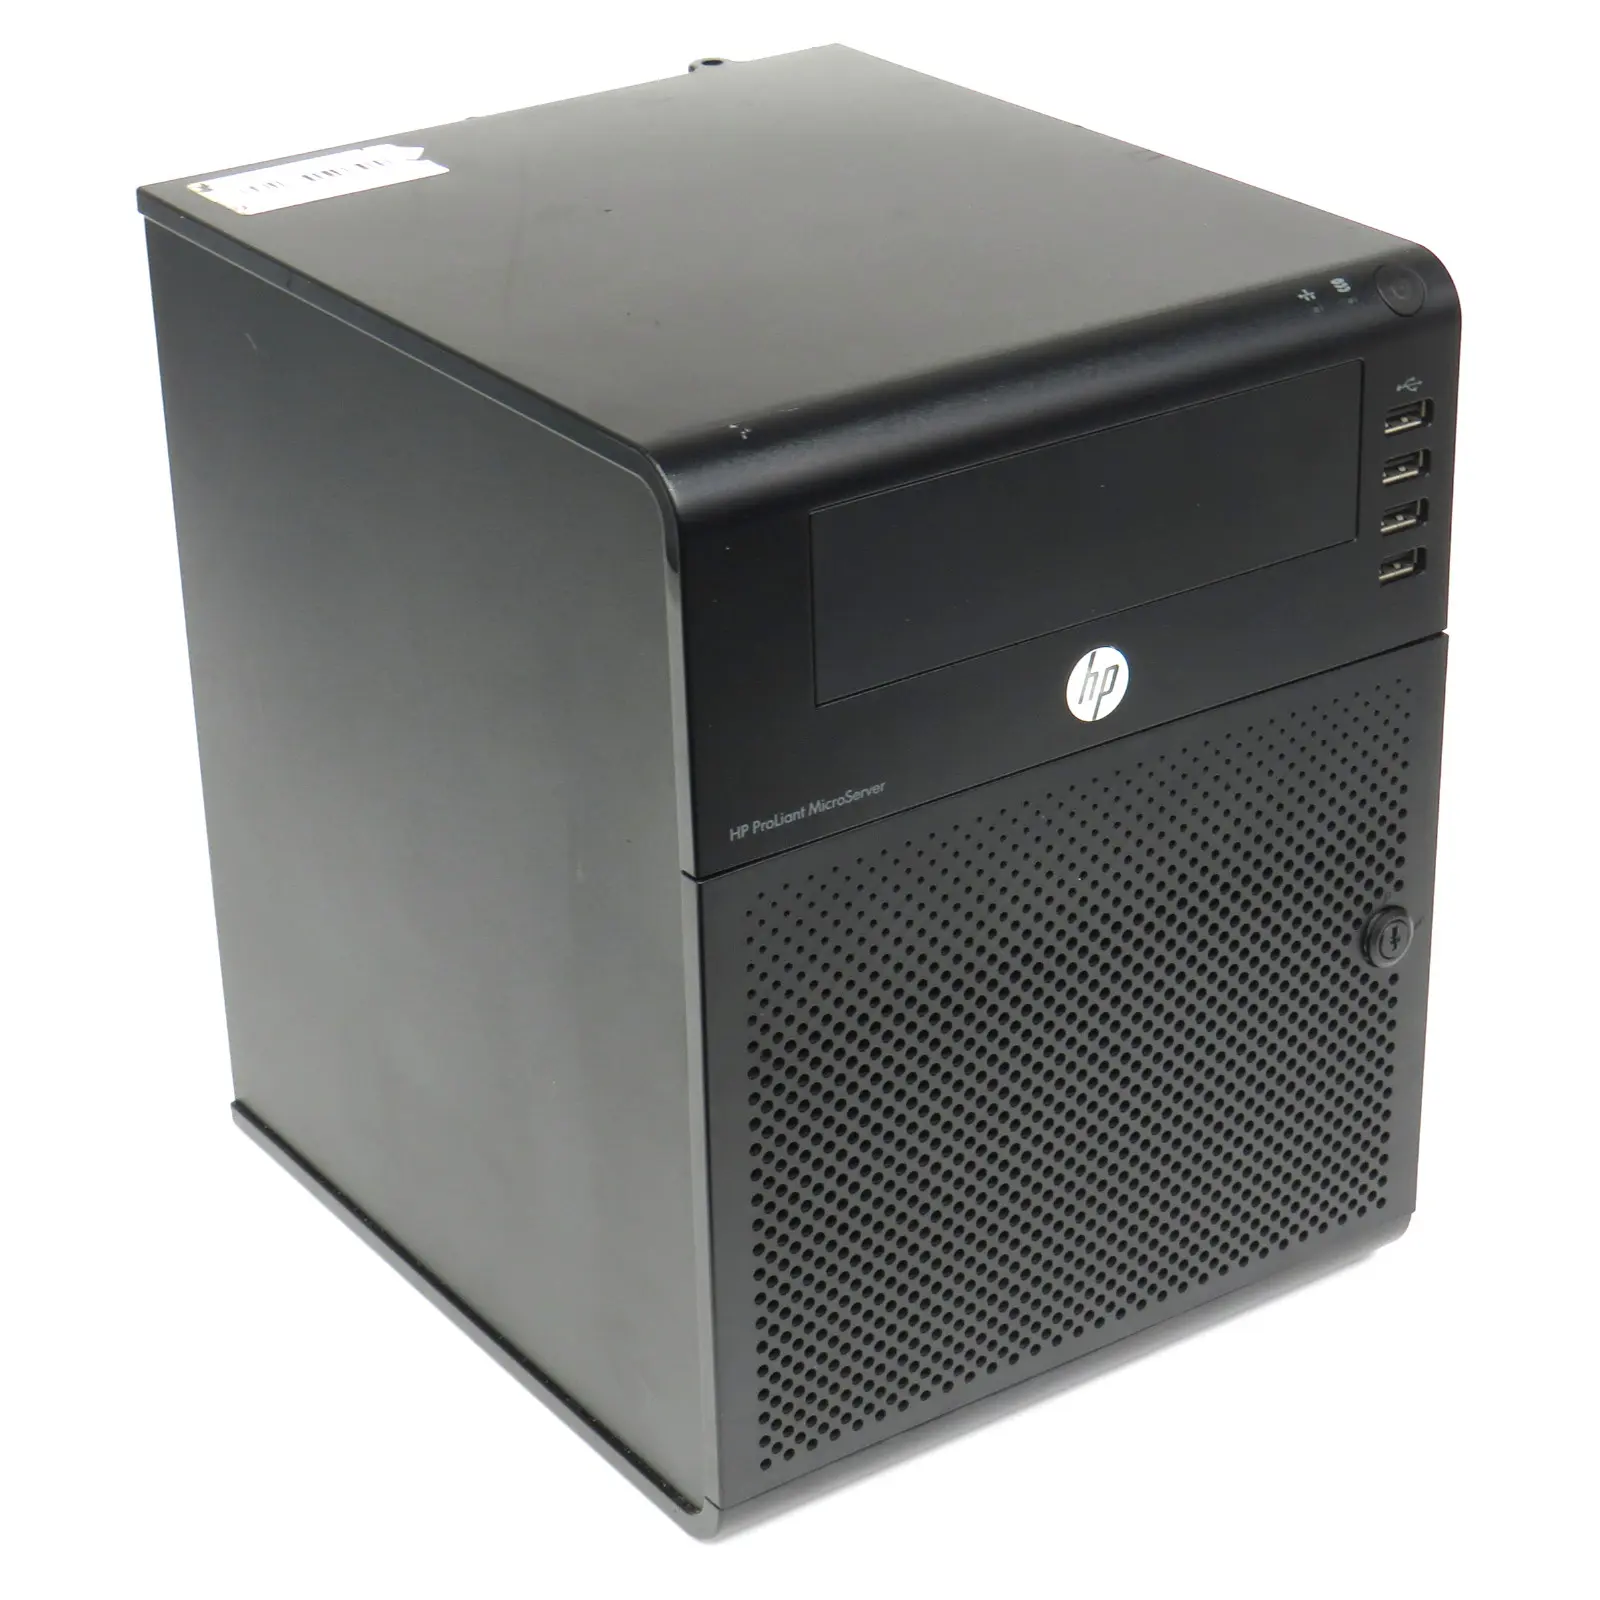 hp hewlett packard proliant microserver hstns 5151 - What operating system does HP ProLiant MicroServer use